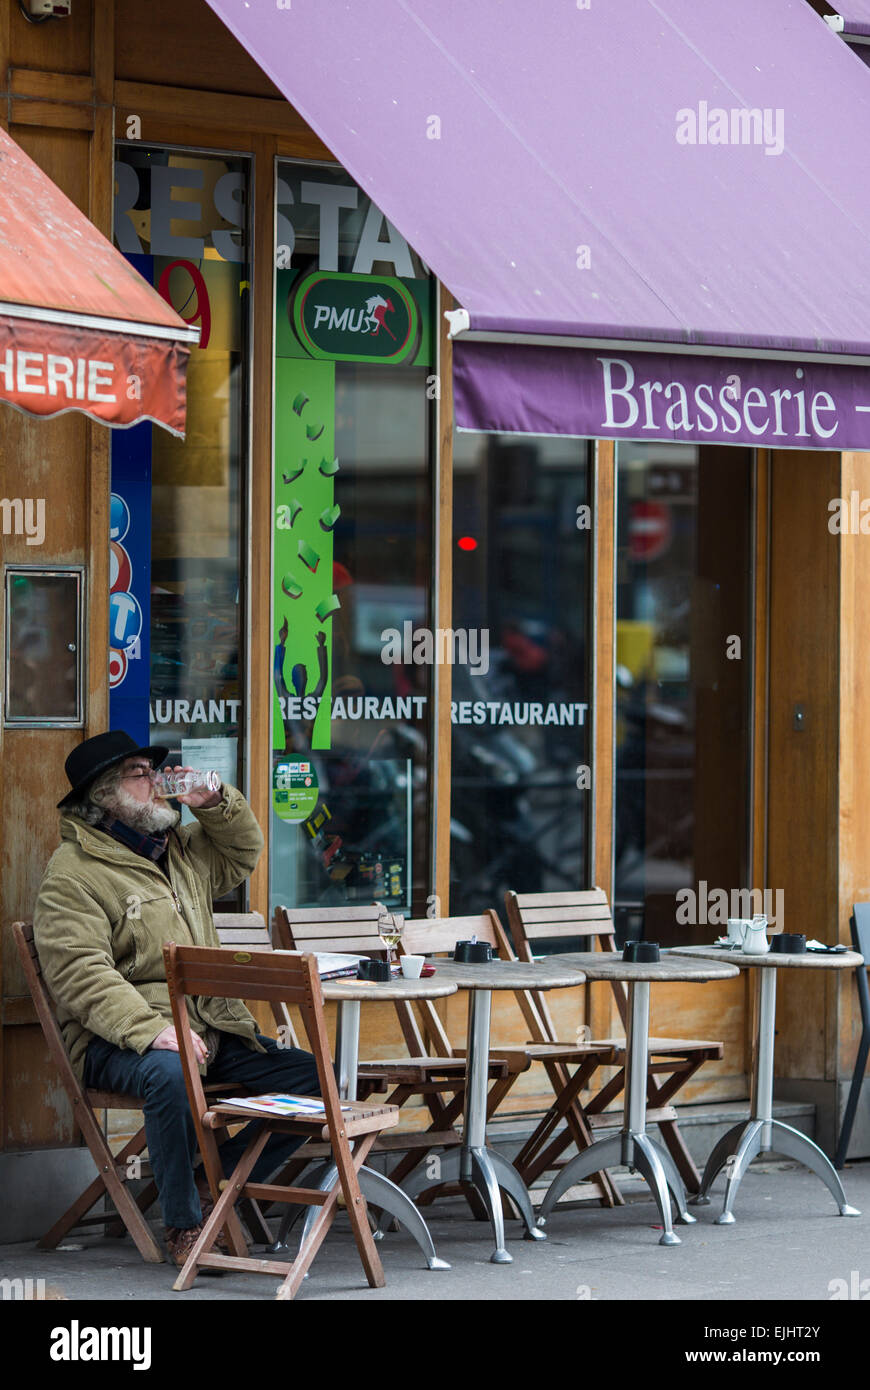 Man drinking at outdoor cafe restaurant in Paris, France Stock Photo